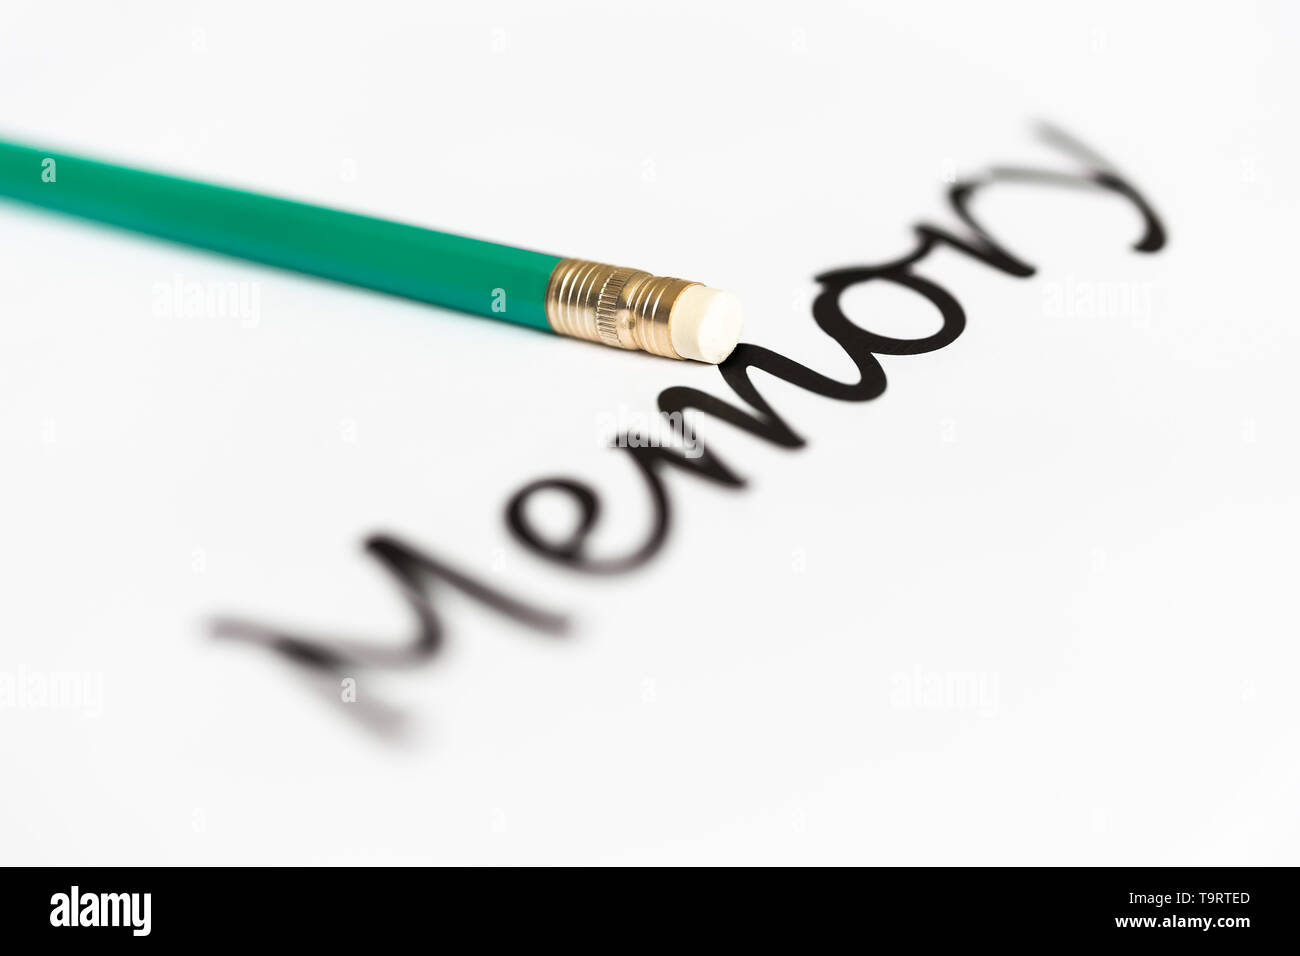 A pencil with an eraser and the word "memory" with a blurry start and ending. The concept of memory problems, oblivion. Stock Photo